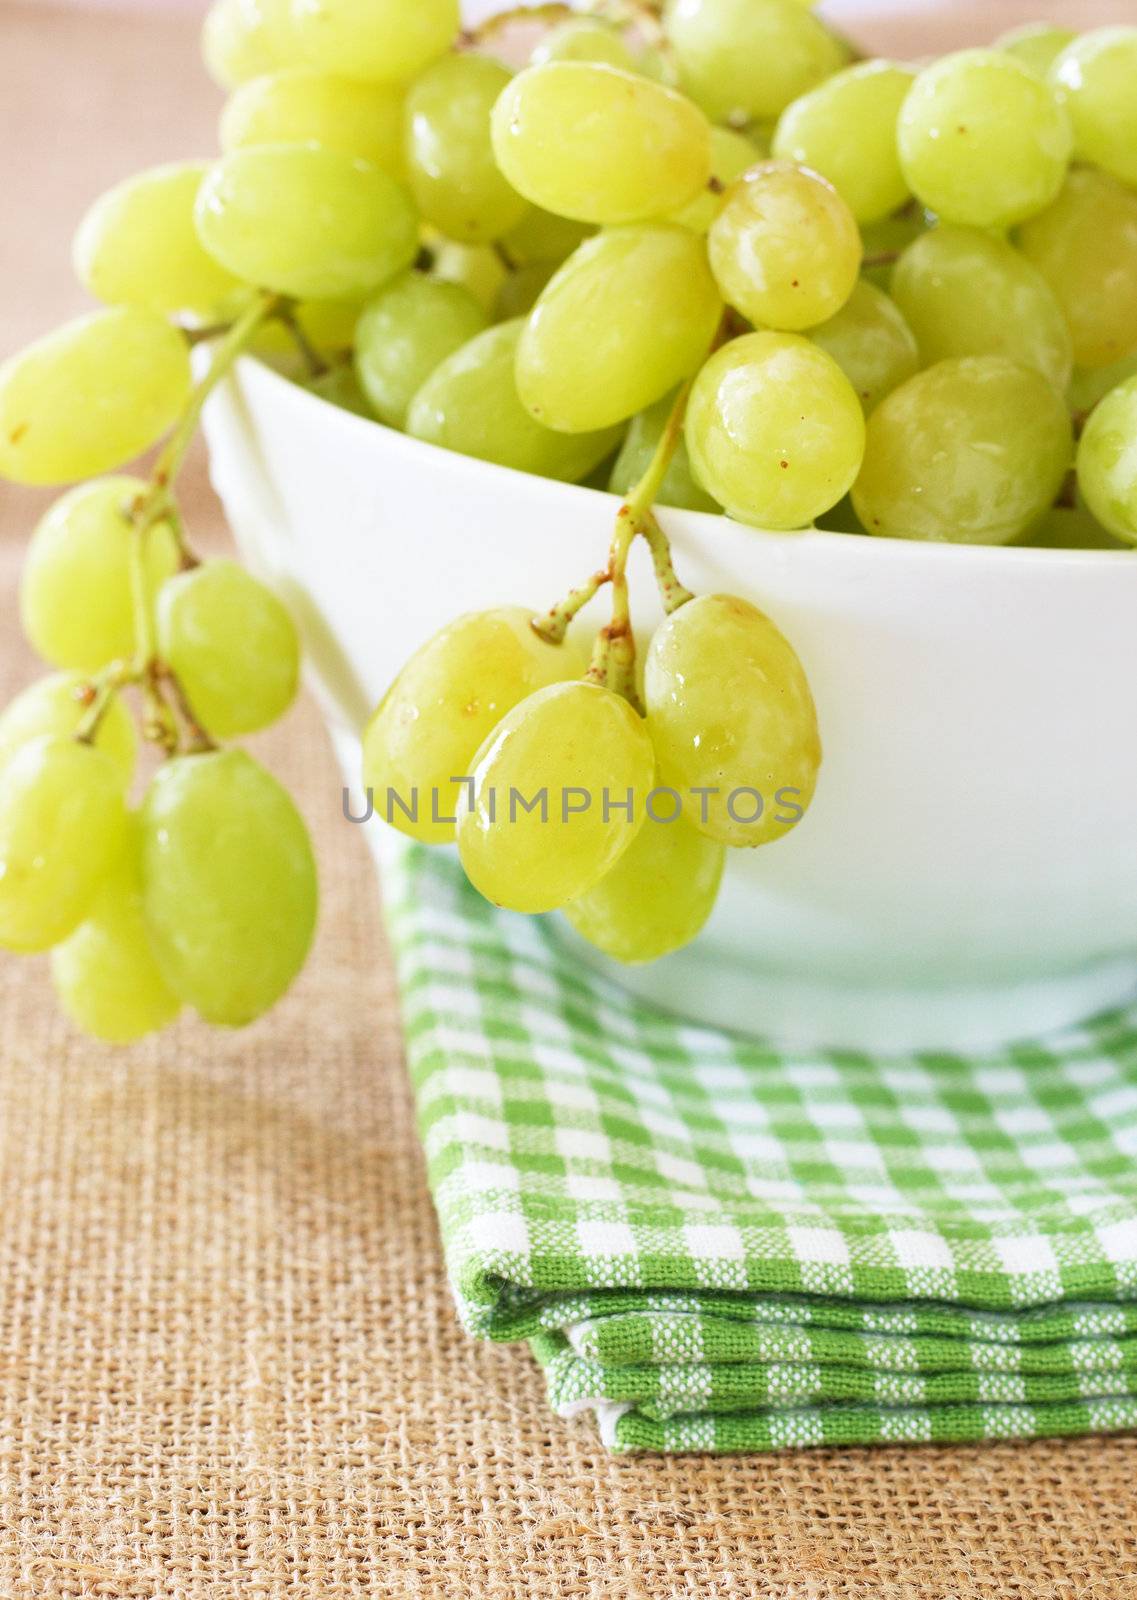 Ripe green grapes in a bowl